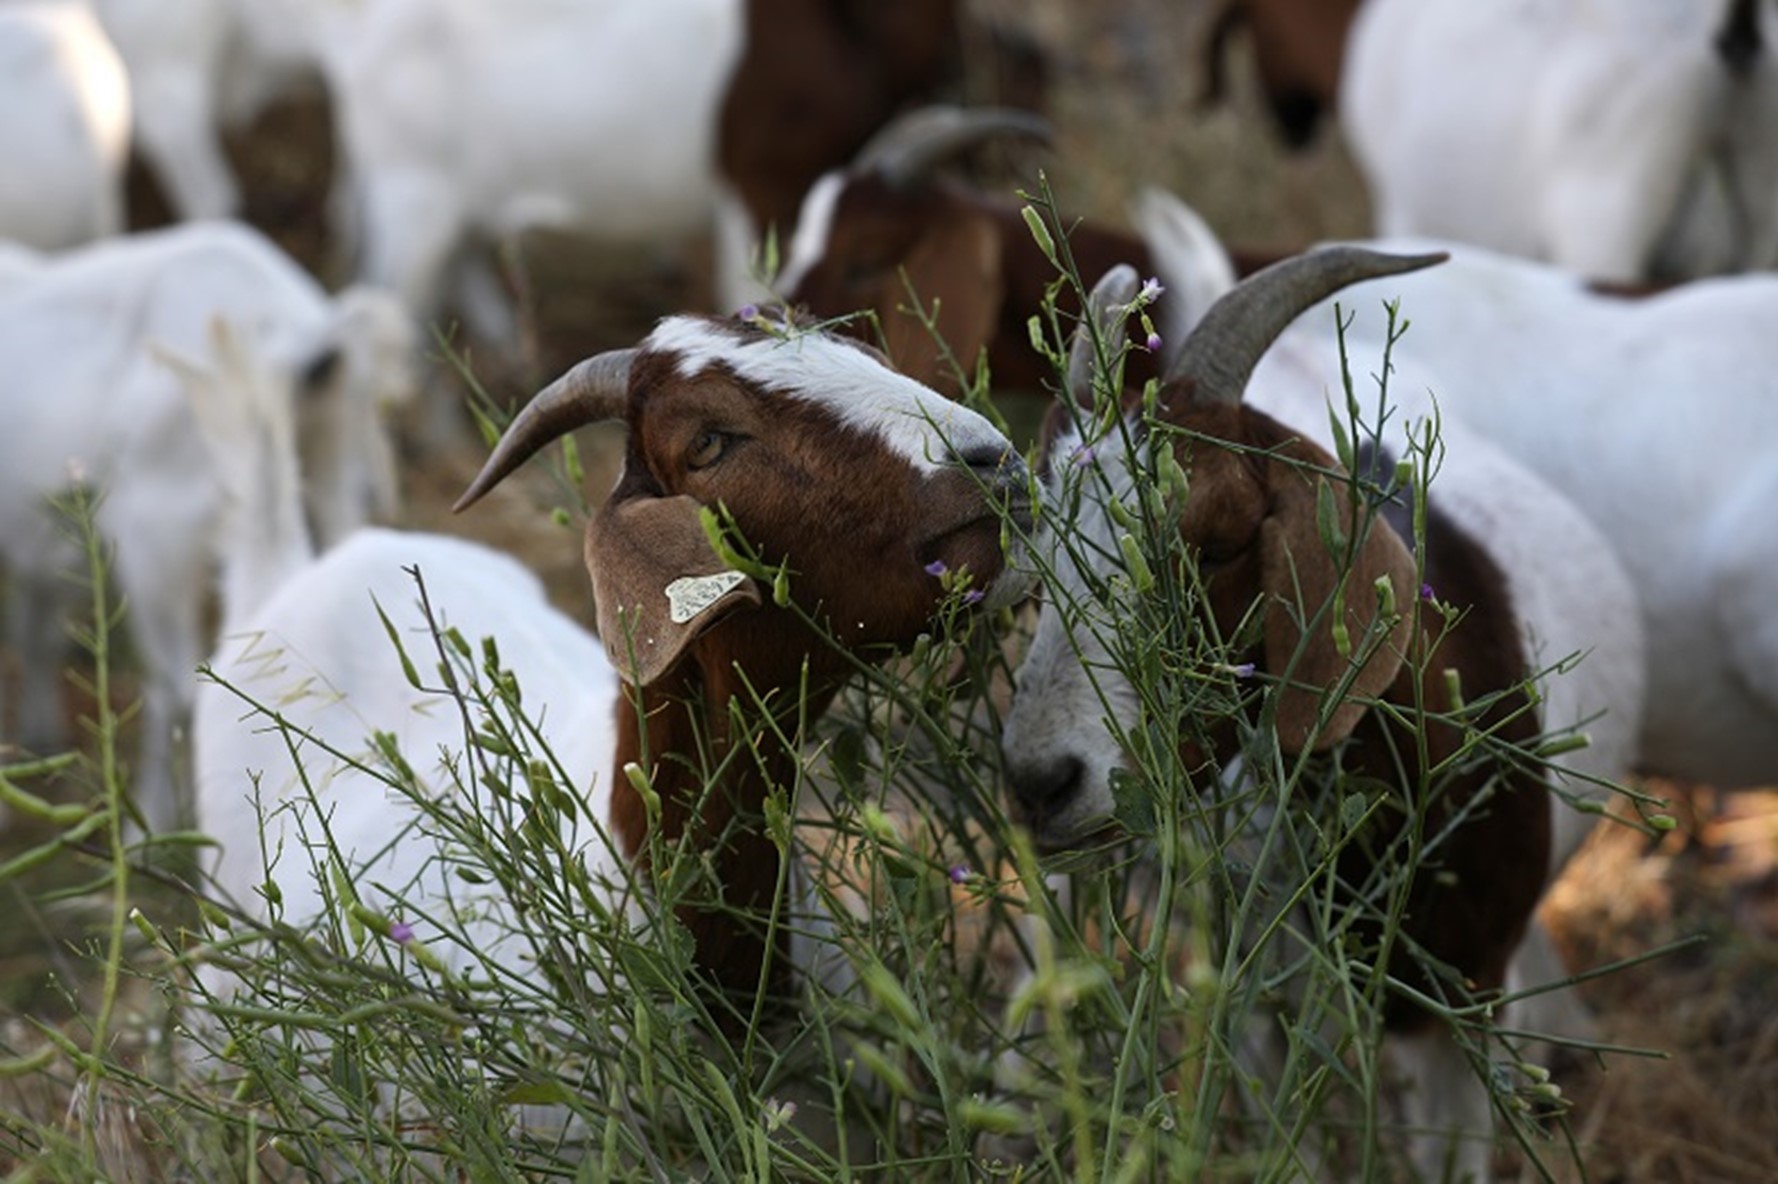 The goats are Spanish-Boer cross, a curious, intelligent and voracious breed